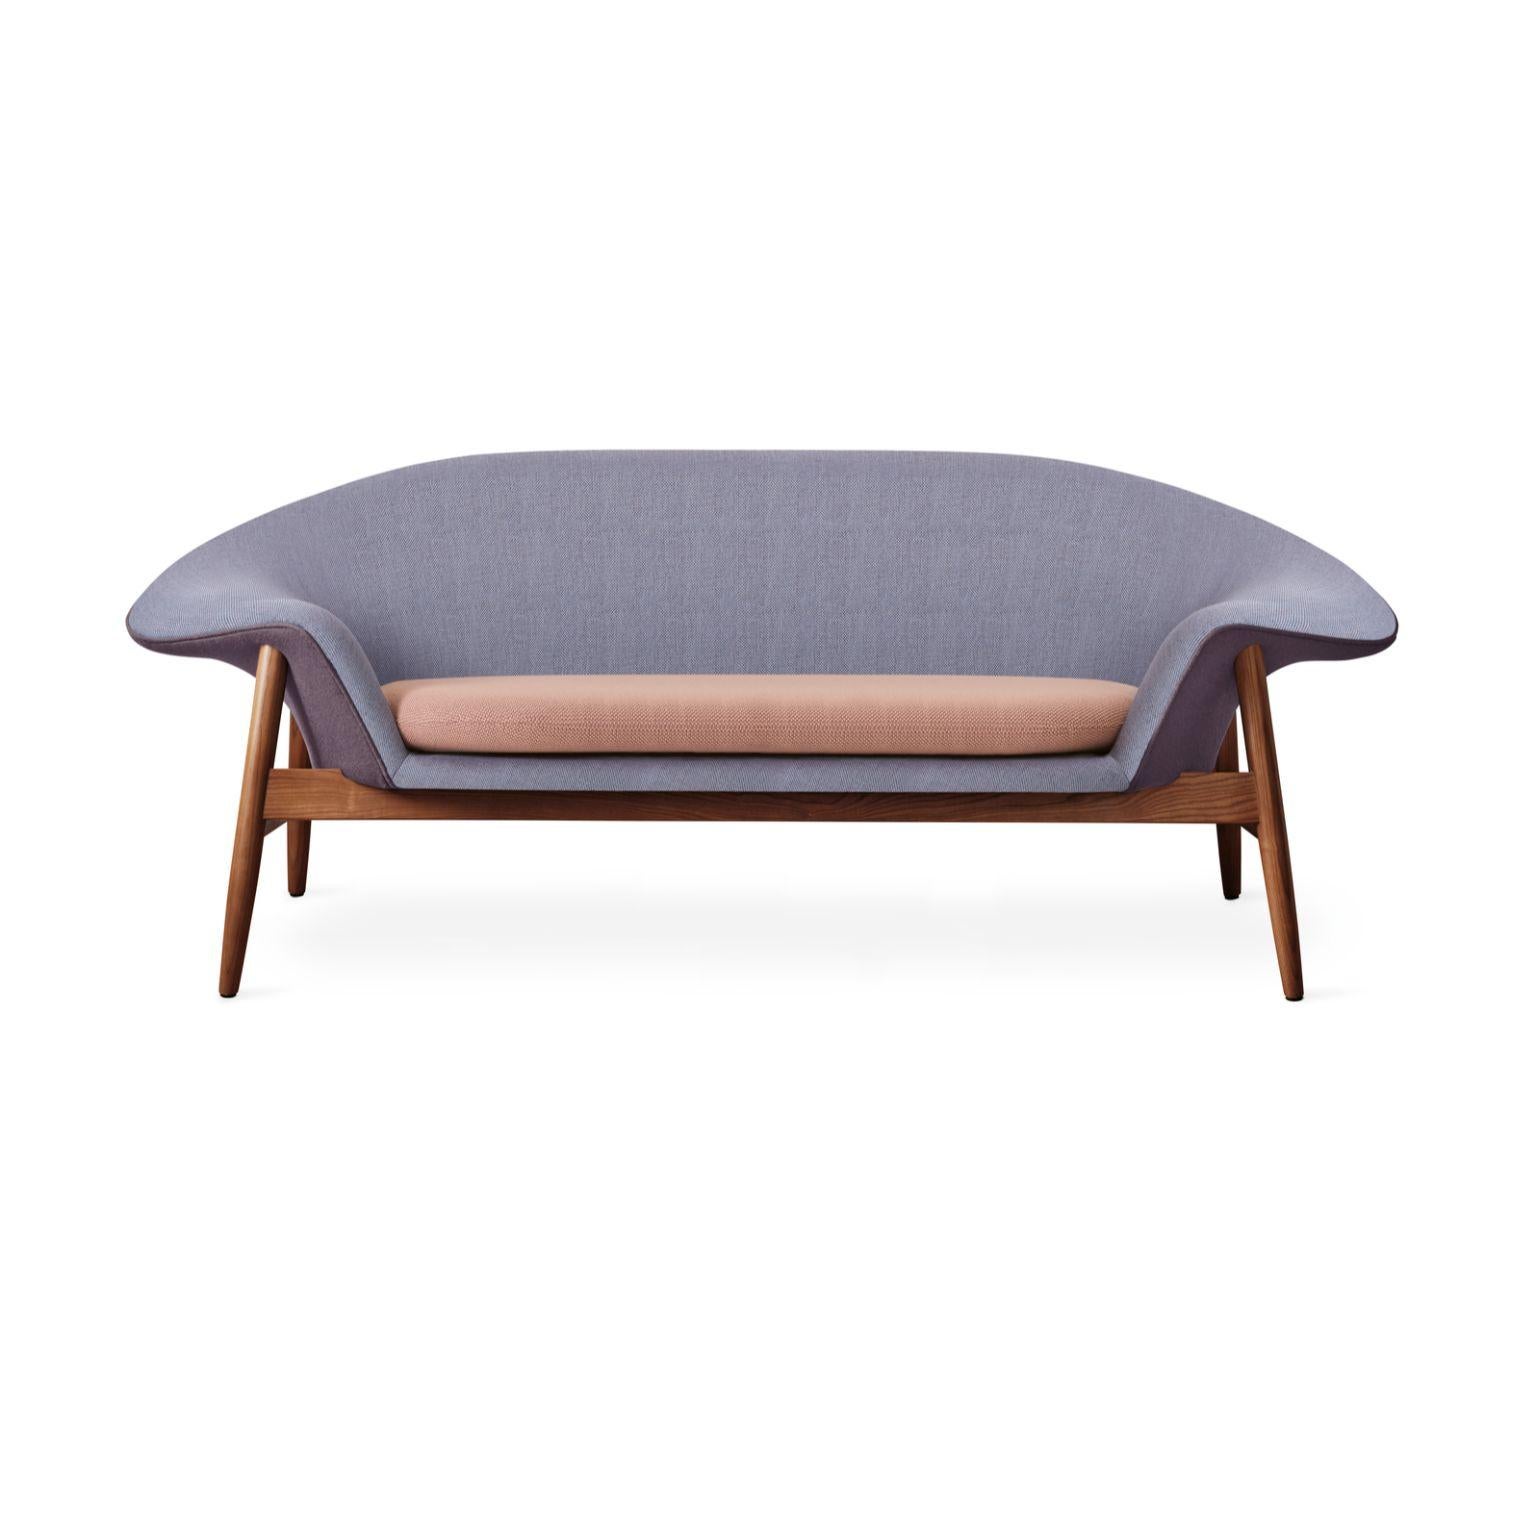 Fried egg sofa soft violet plum fresh peach by Warm Nordic
Dimensions: D 186 x W 68 x H 68 cm
Material: Textile upholstery, Solid oiled teak
Weight: 42 kg
Also available in different colours and finishes.

Warm Nordic is an ambitious design